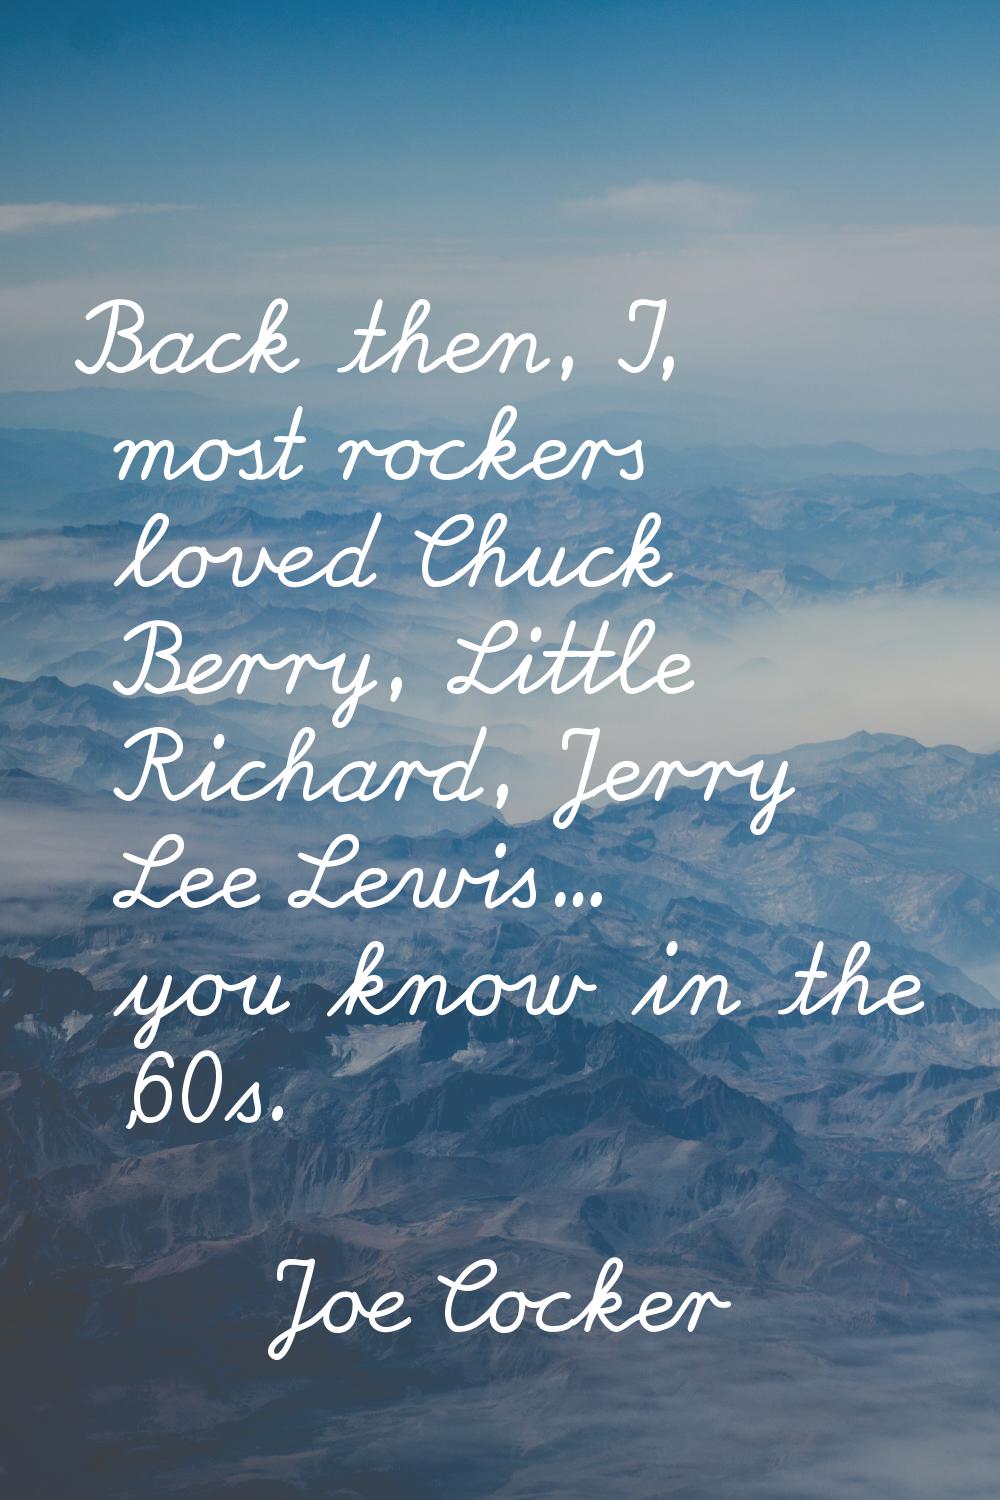 Back then, I, most rockers loved Chuck Berry, Little Richard, Jerry Lee Lewis... you know in the '6